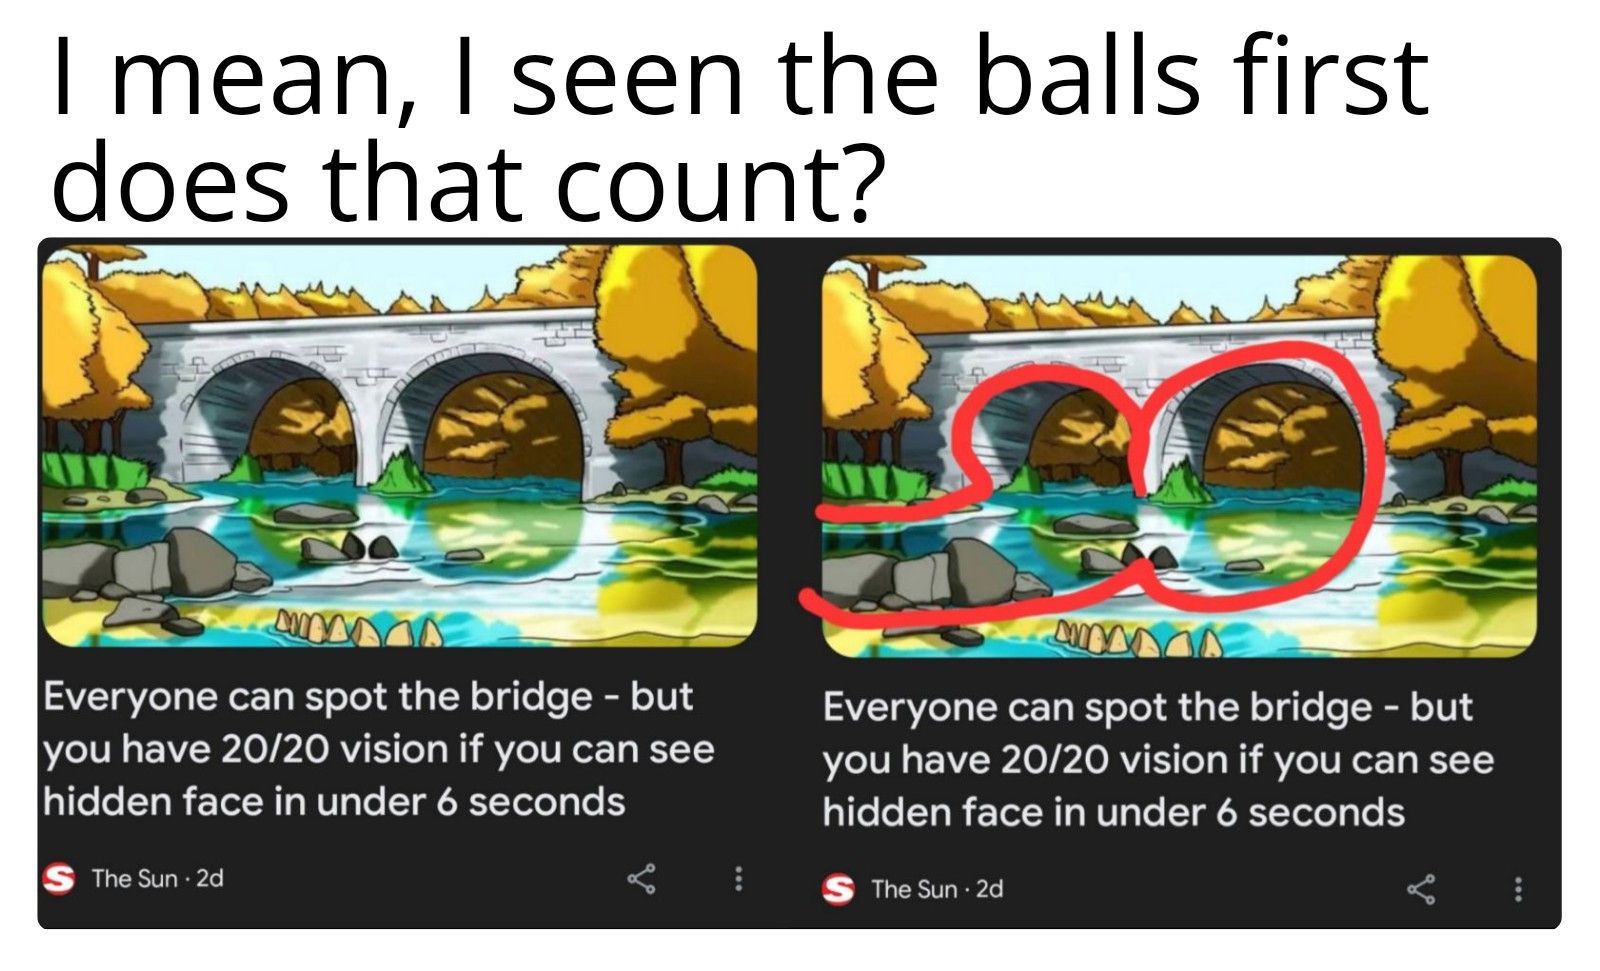 I mean, I seen the balls first
does that count?
WESTER
Everyone can spot the bridge - but
you have 20/20 vision if you can see
hidden face in under 6 seconds
S The Sun 2d
Everyone can spot the bridge - but
you have 20/20 vision if you can see
hidden face in under 6 seconds
S The Sun 2d